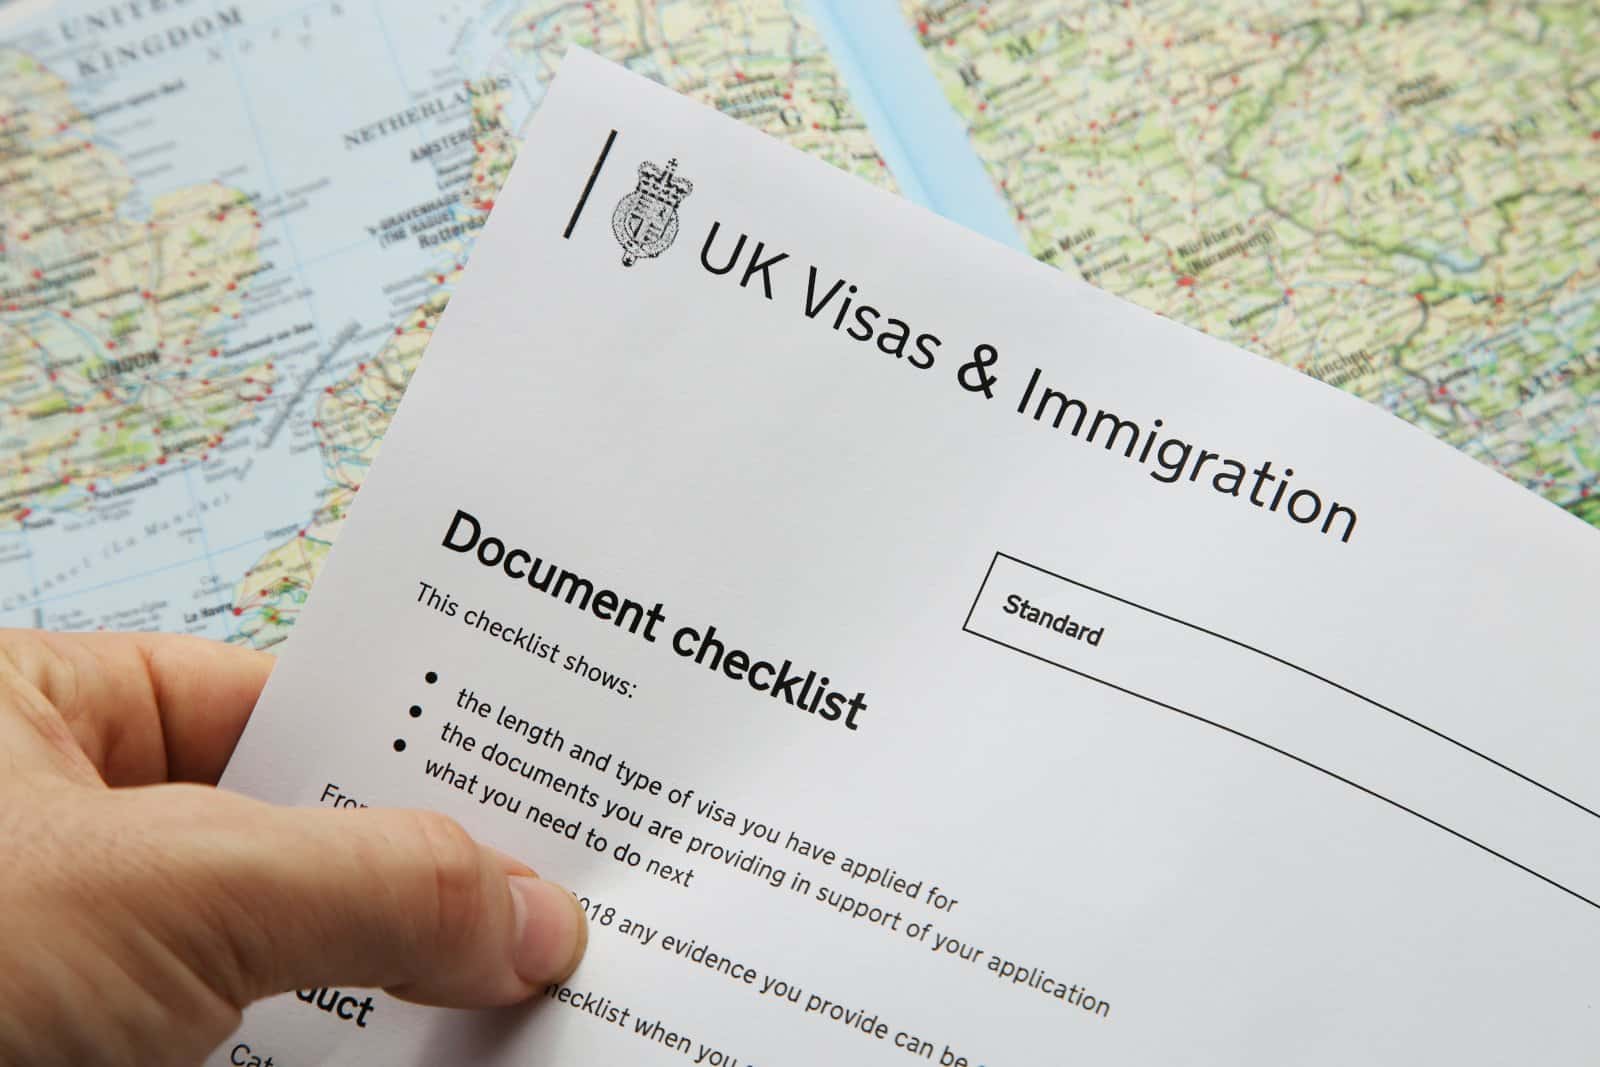 Image Credit: Shutterstock / MD_Photography <p>The valid passport with an issuing date, of ten years to the day, will no longer be allowed to enter the EU even if it still has months remaining before expiry.</p>